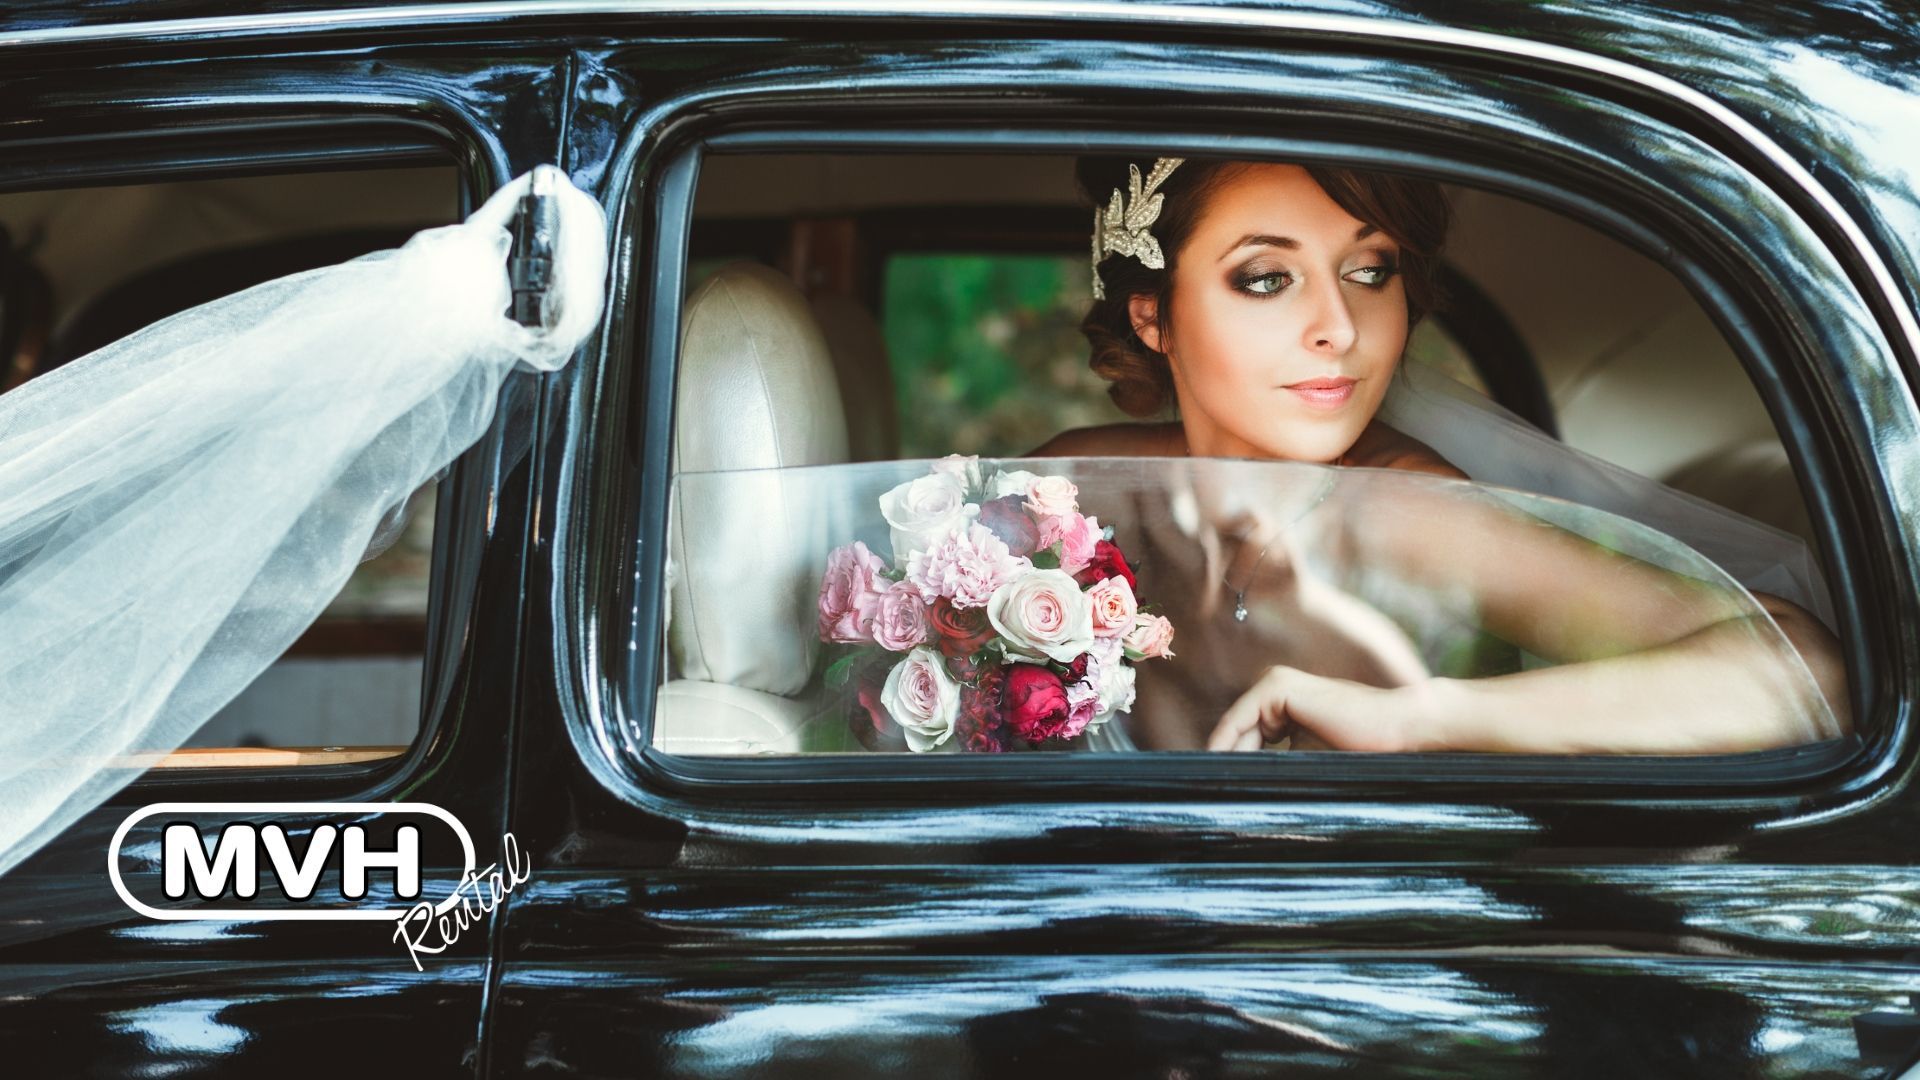 You might have chosen your buttonholes, bouquets and bridalwear – but what about your wheels? Get your wedding transport sorted with our quick guide.